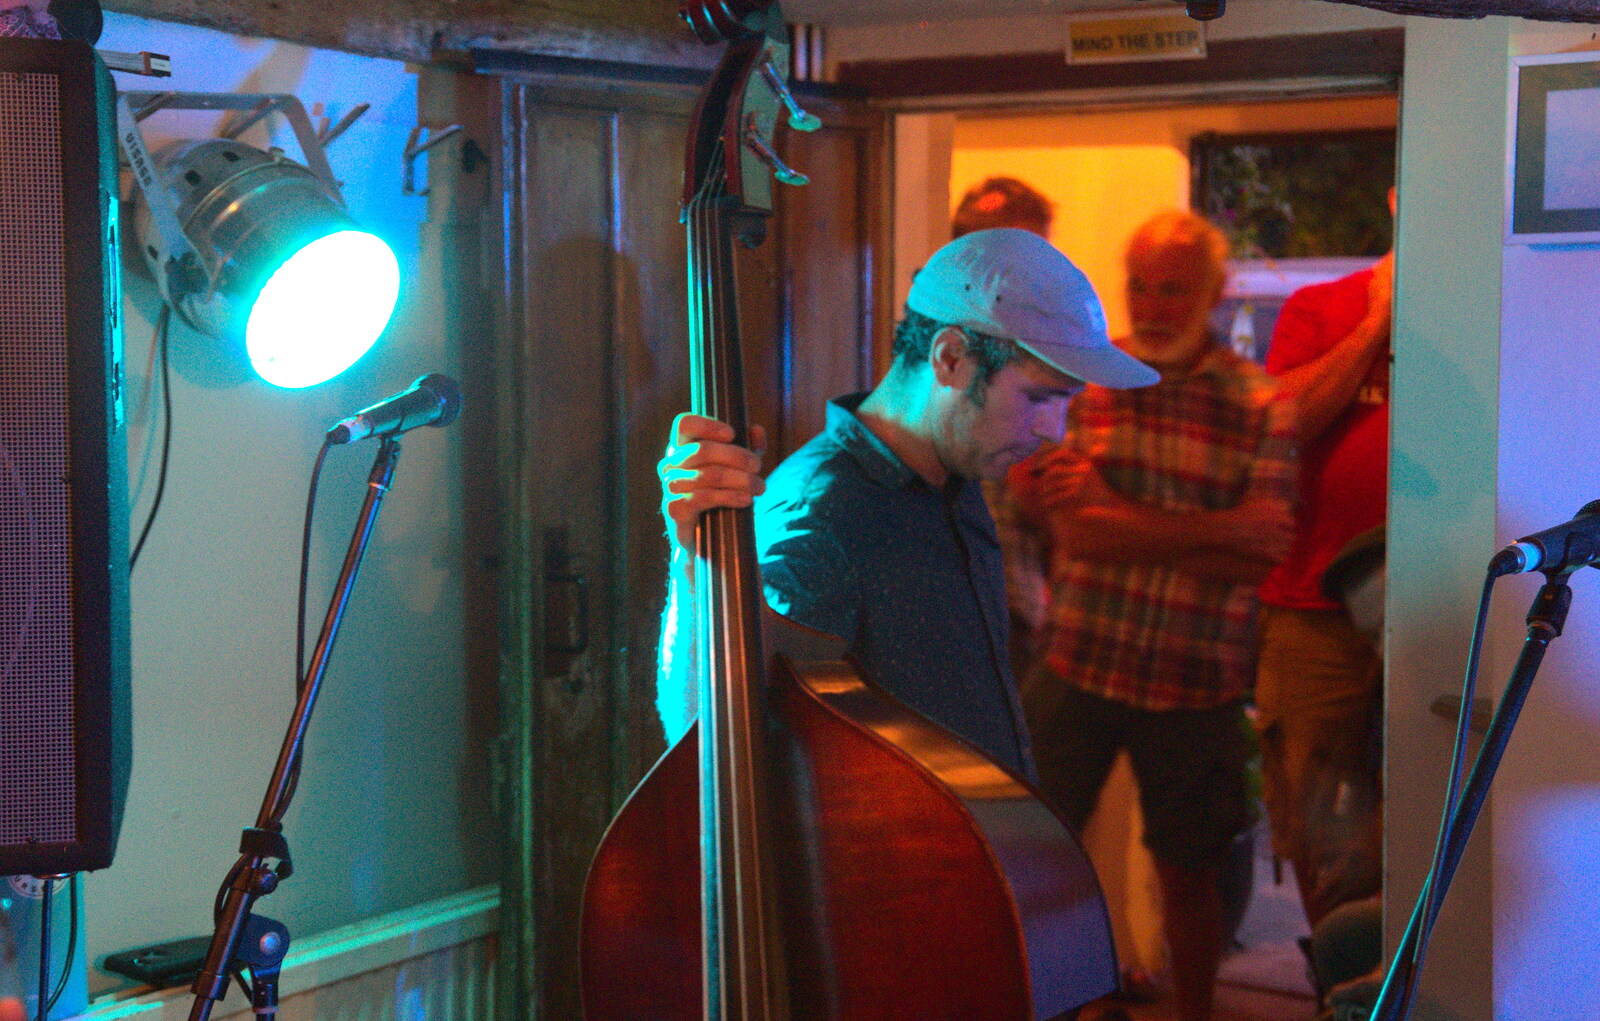 Andrew Van Voorhees on double bass takes a break from The Whiskey Shivers at The Crown, Burston, Norfolk - 1st August 2018